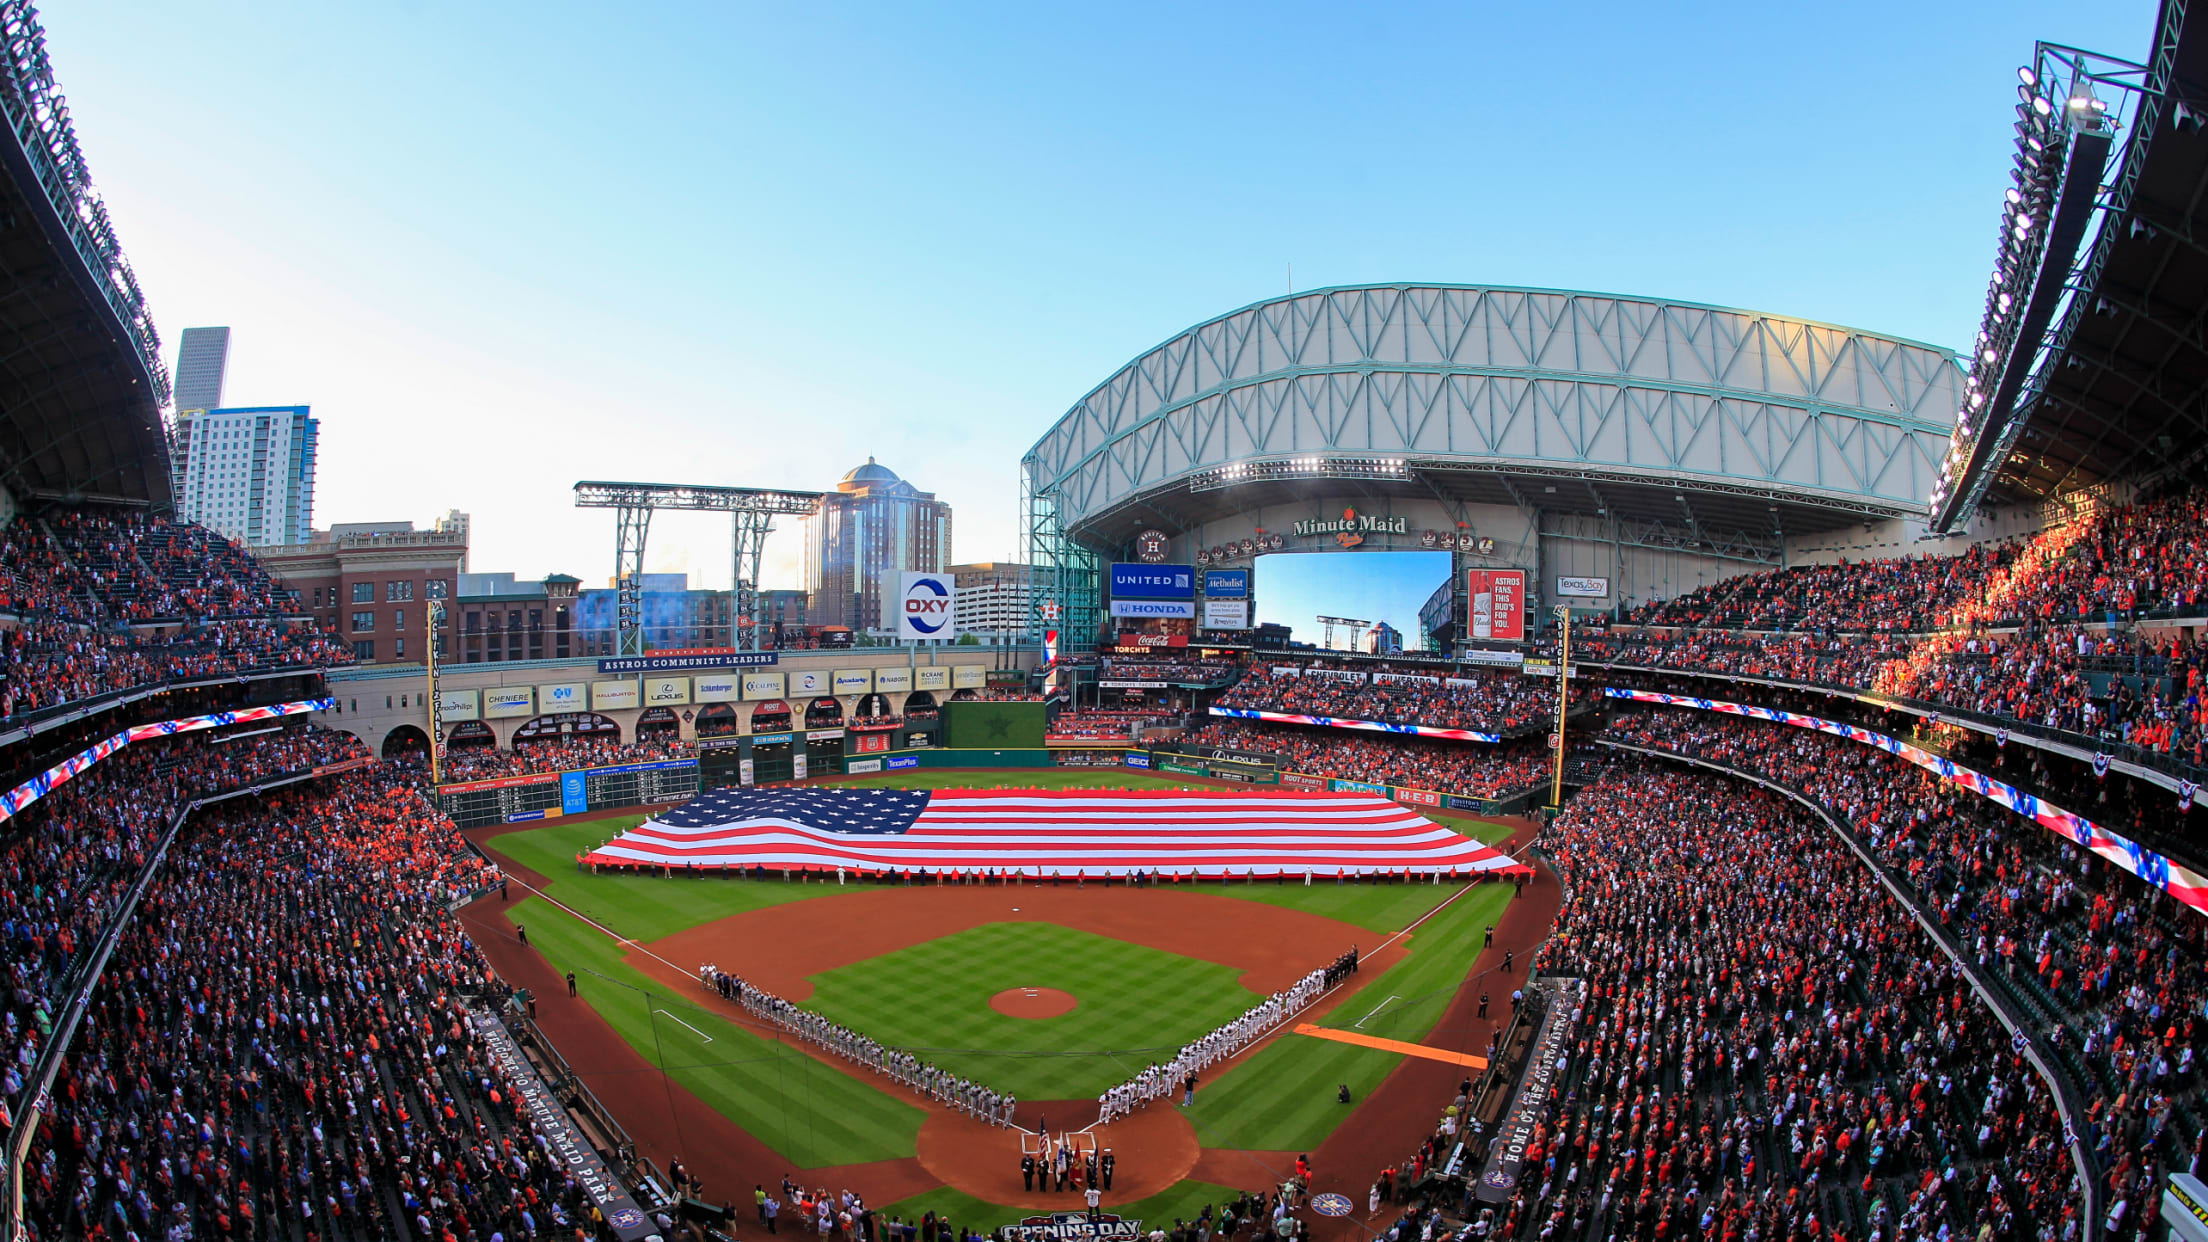 Minute Maid Park Bag Policy Everything You Need to Know The Stadiums